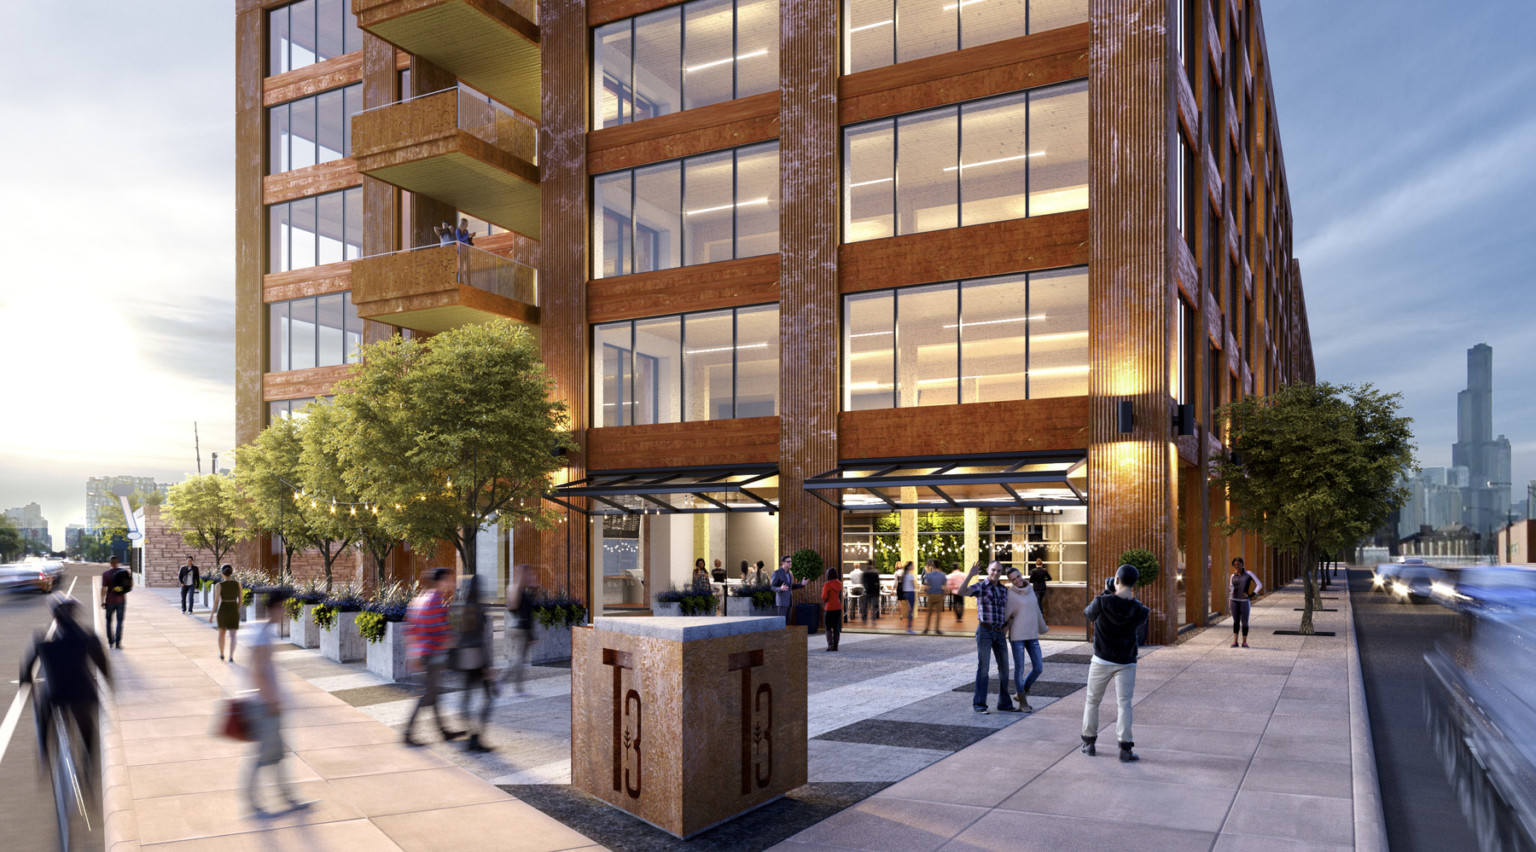 Concept for a mass timber building in chicago, warm copper exterior with overhanging balconies. T3 cubic sign at corner